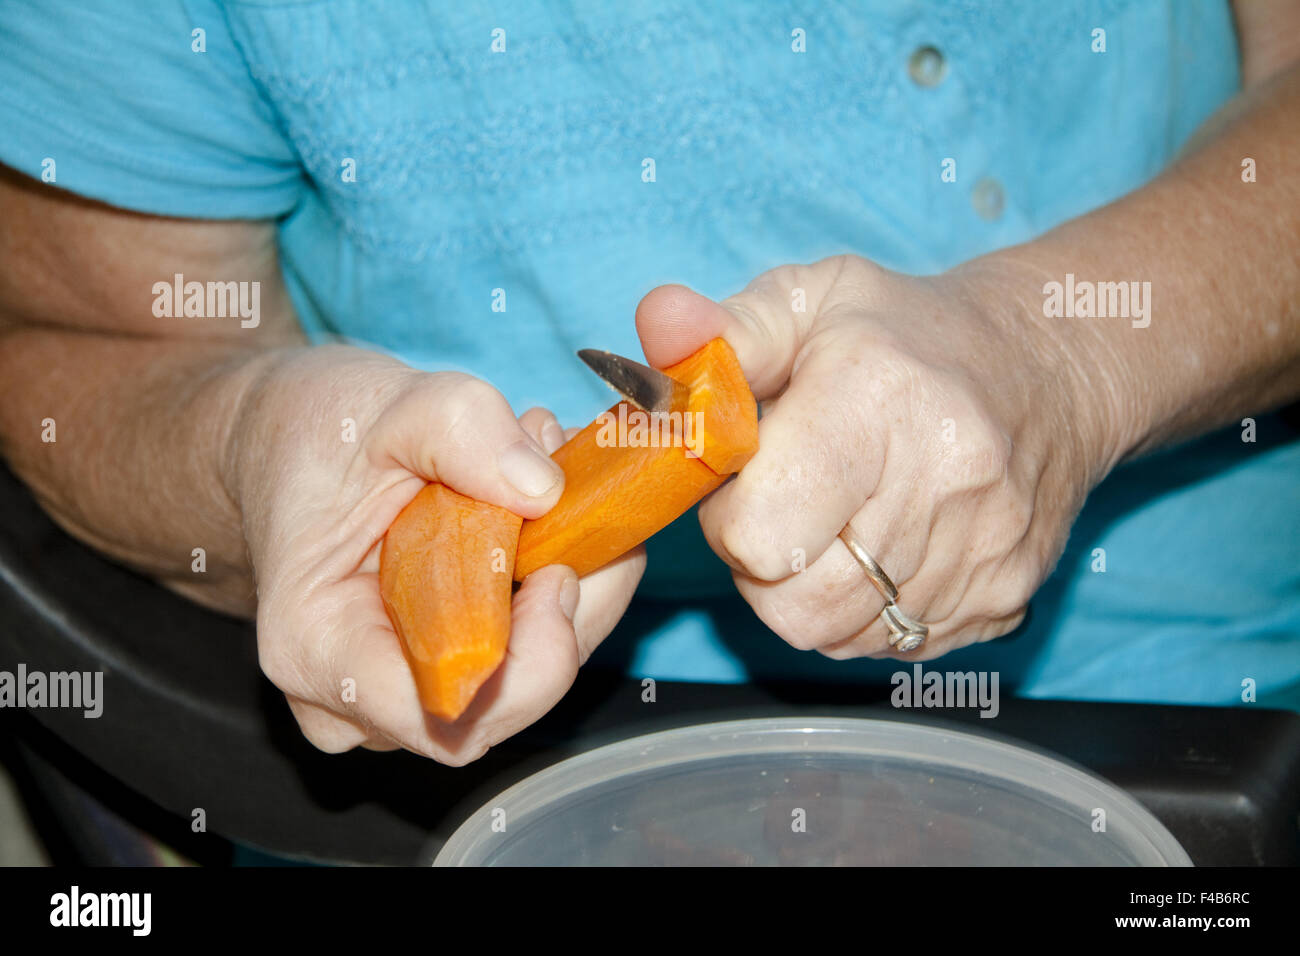 Carrot in the hand to cut Stock Photo